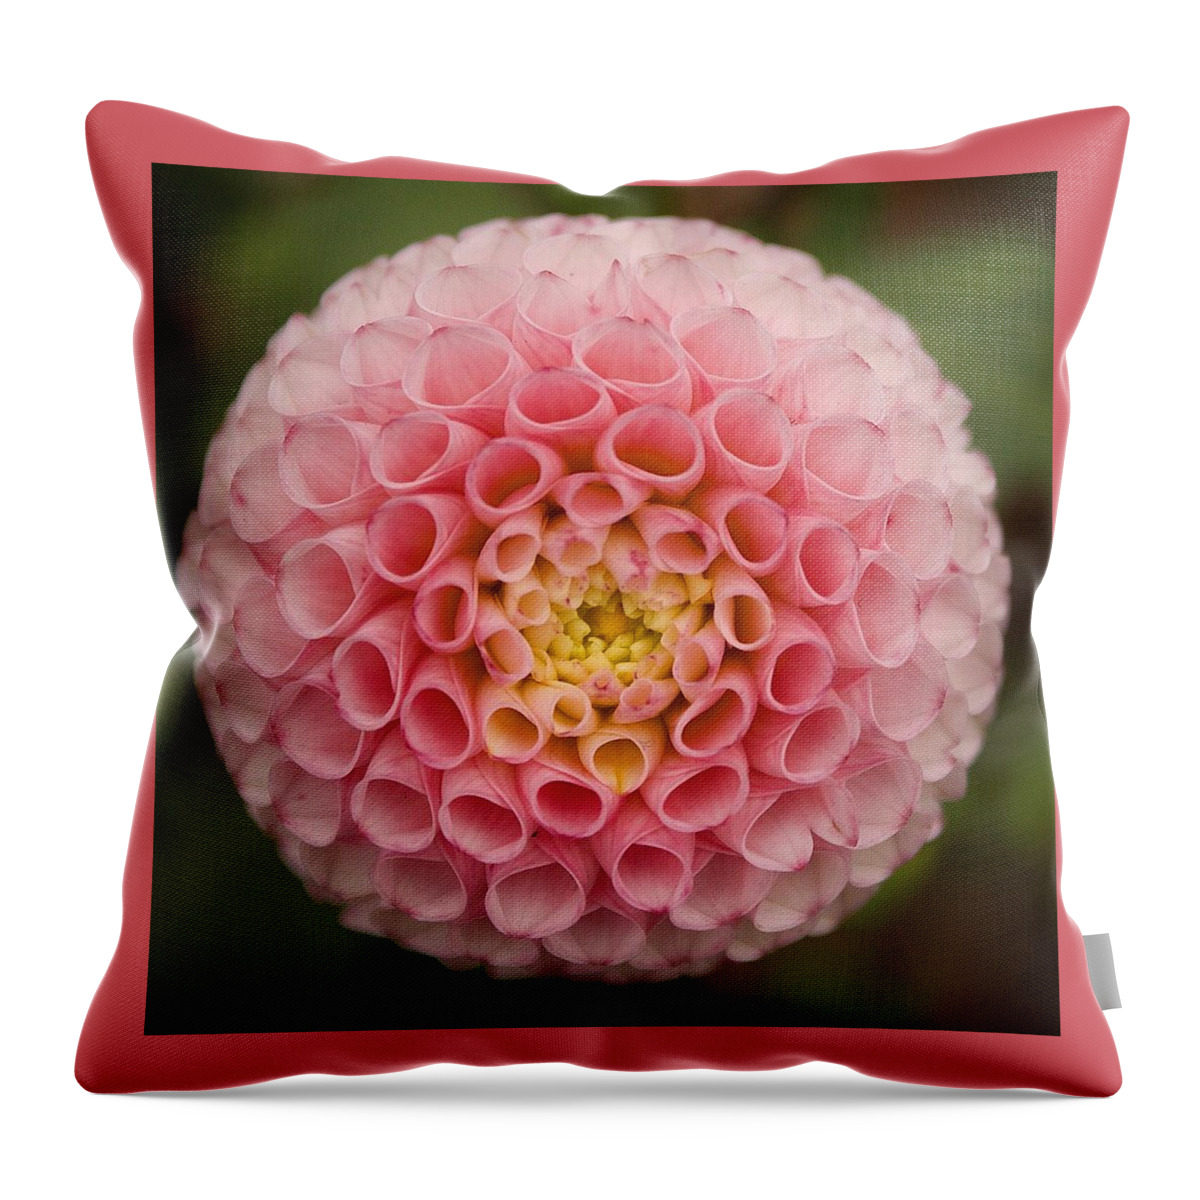 Symmetry Throw Pillow featuring the photograph Symmetrical Dahlia by Brian Eberly